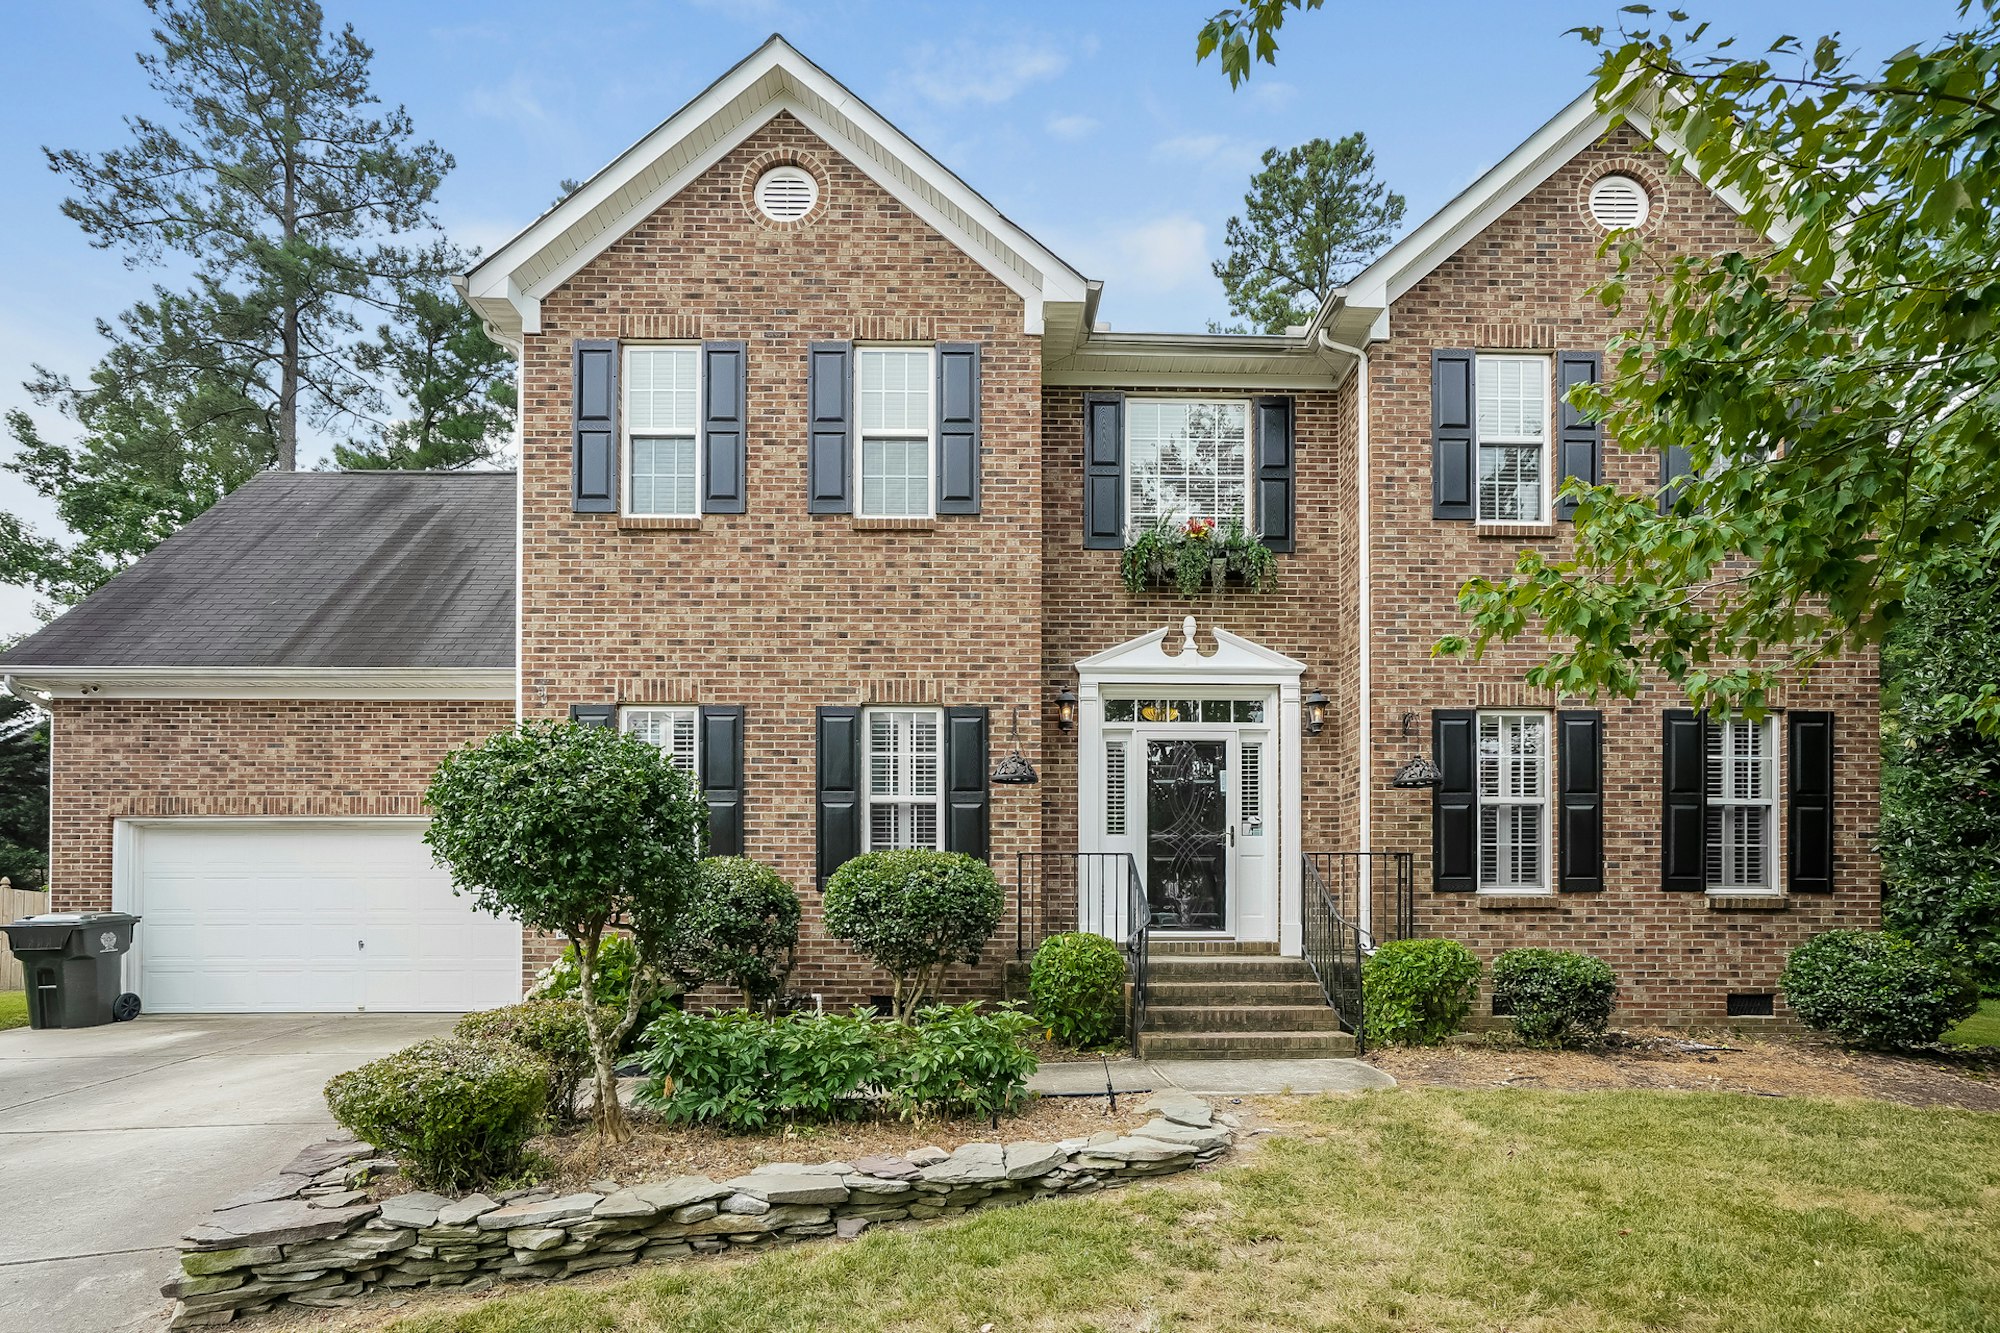 Photo 1 of 25 - 8201 Coosa Ct, Raleigh, NC 27616